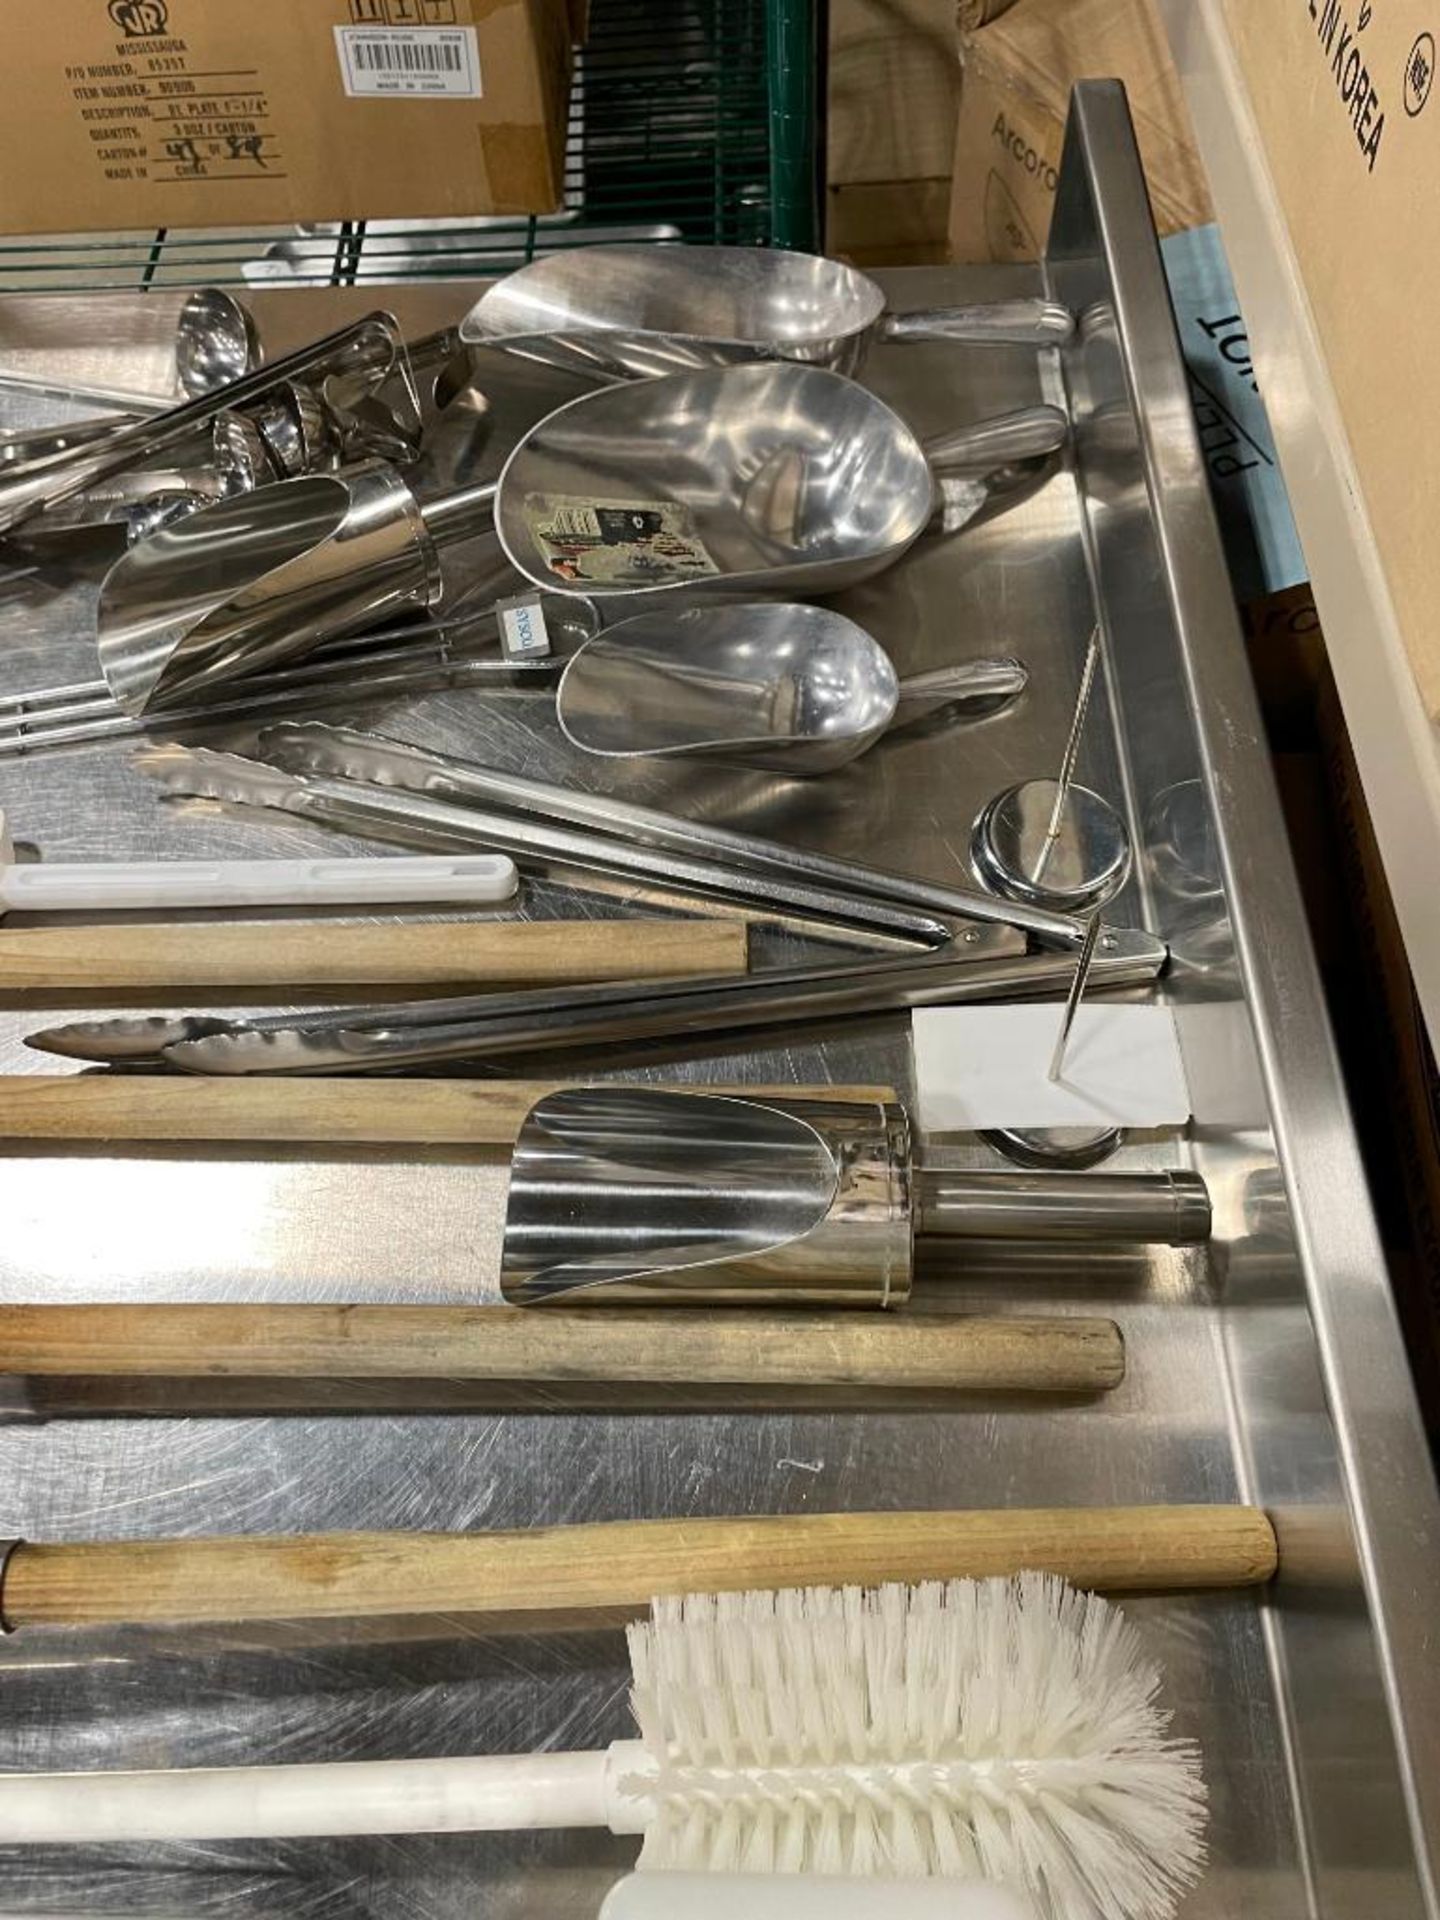 STAINLESS STEEL LADES, ICE SCOOPS, WIRE BRUSHES & FOOD STORAGE CONTAINER - Image 9 of 11